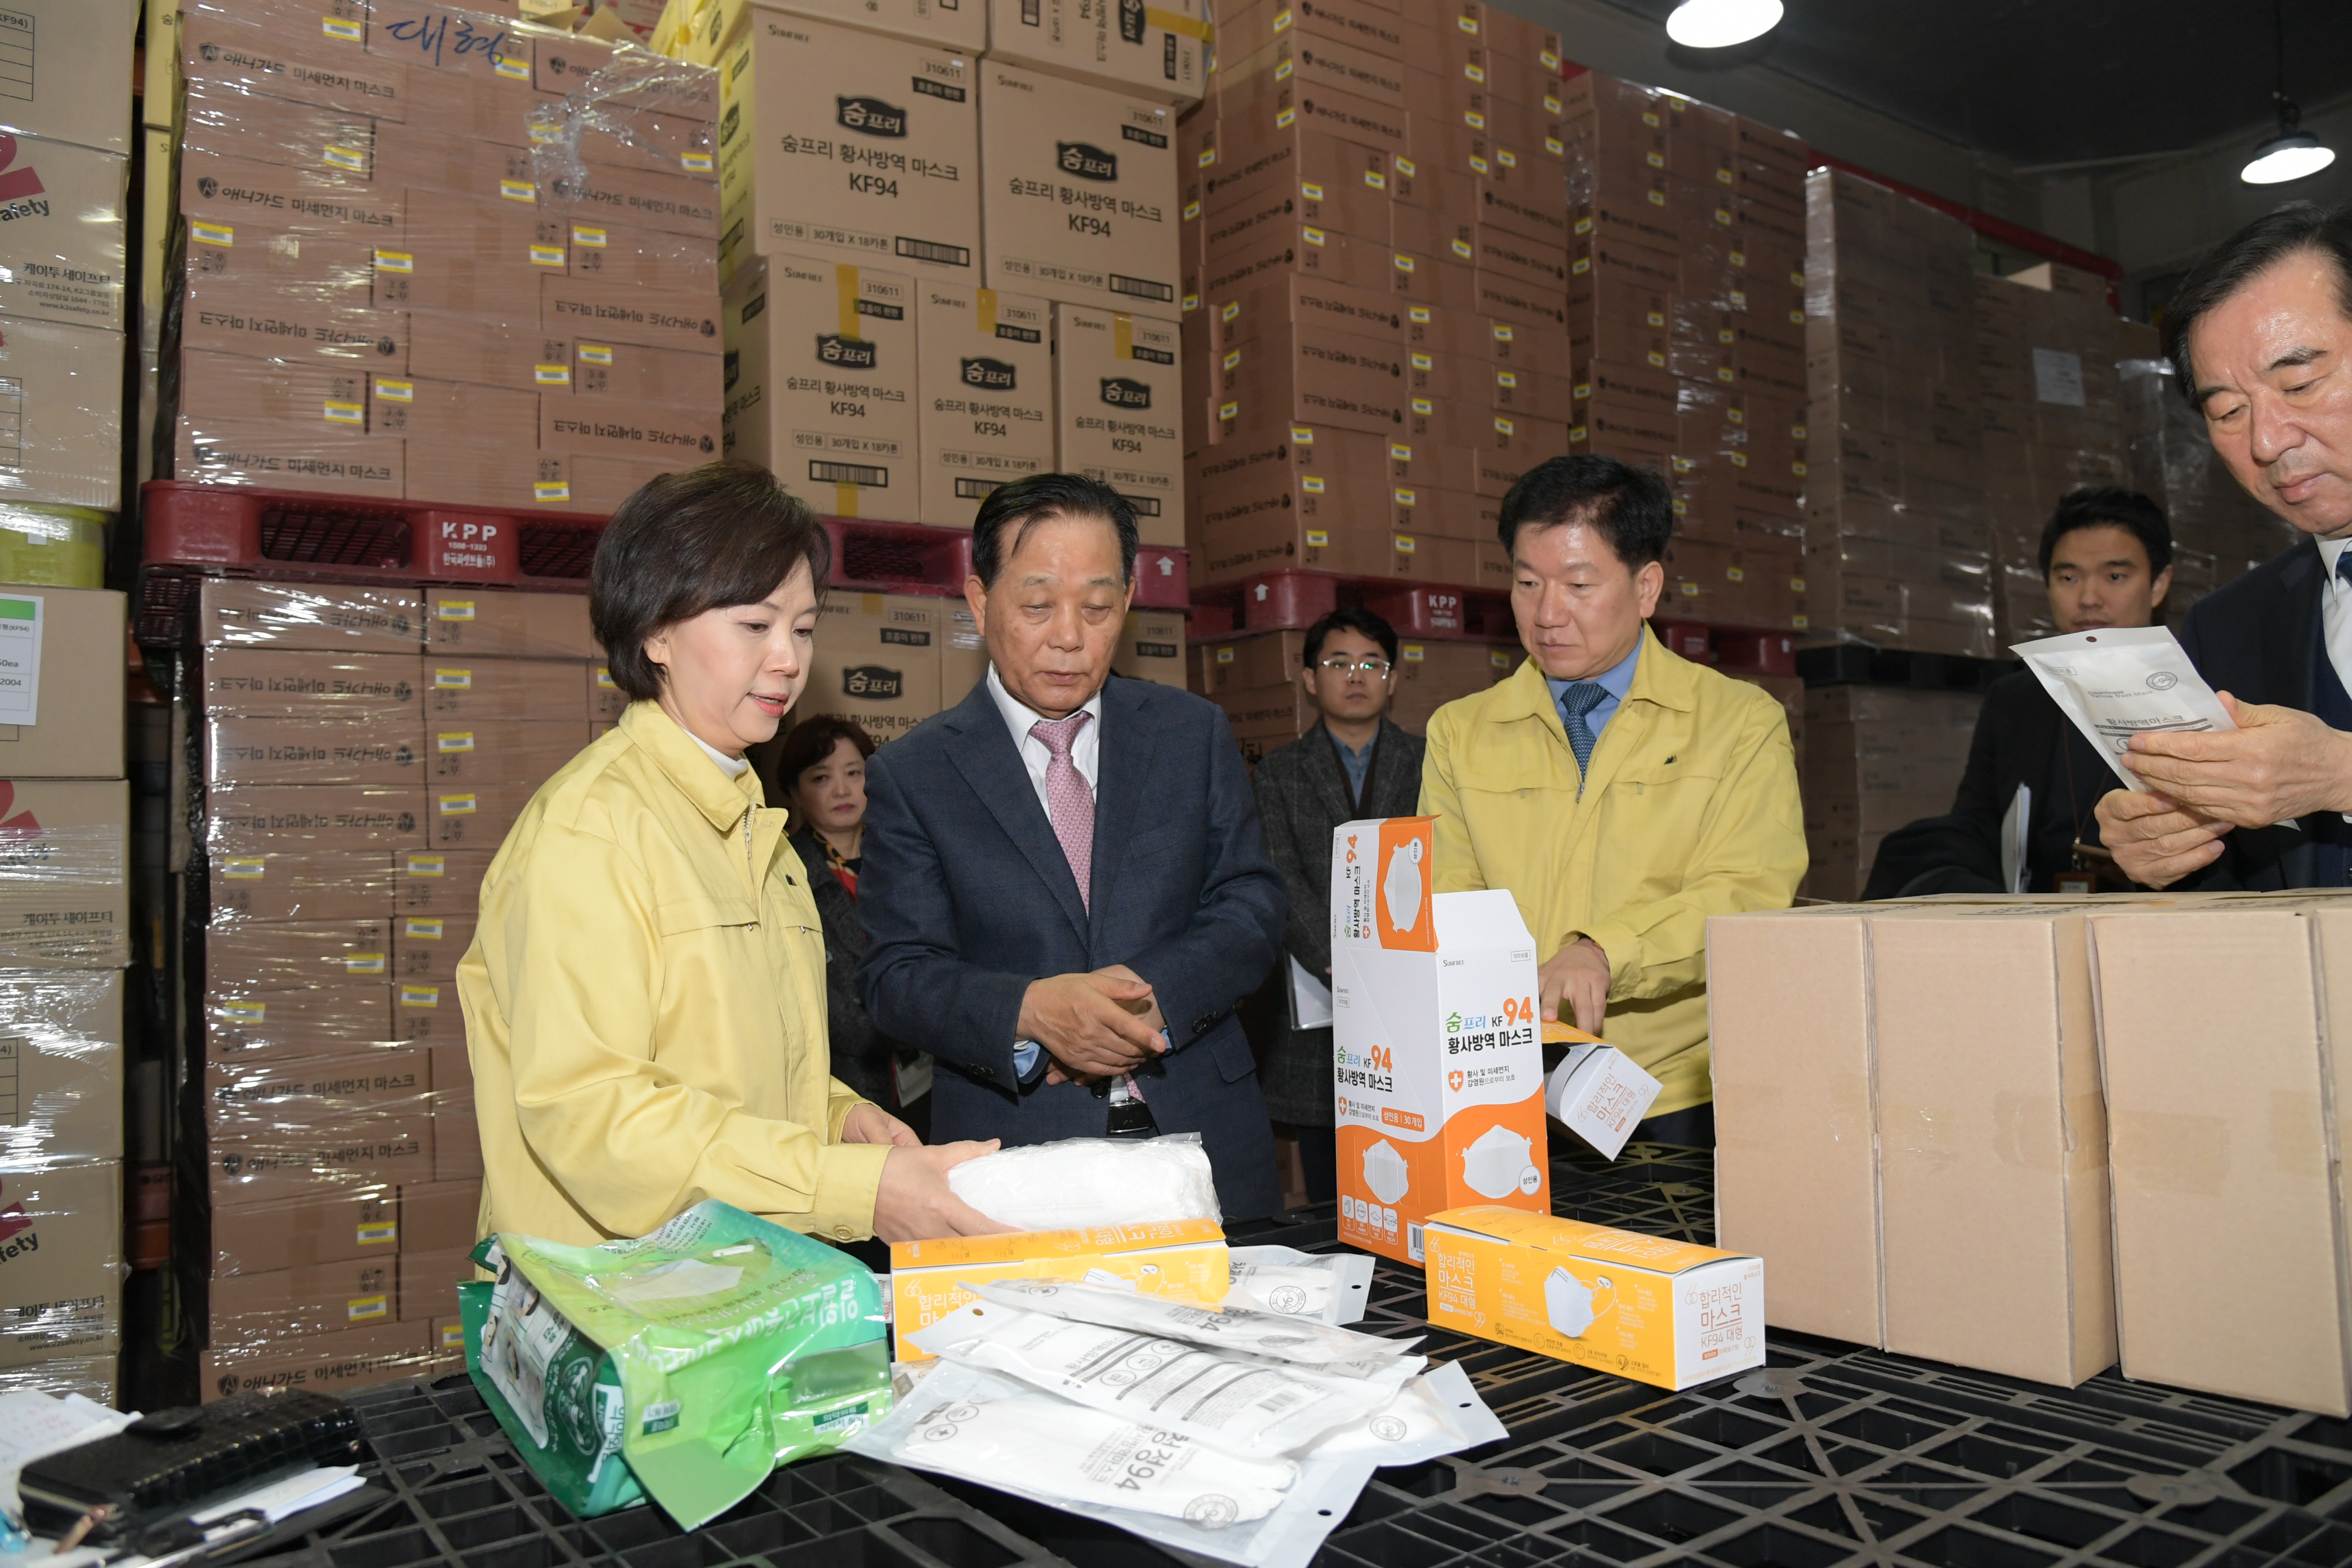 Photo News5 - [Mar. 10, 2020] Minister conducts inspection of public mask distribution center